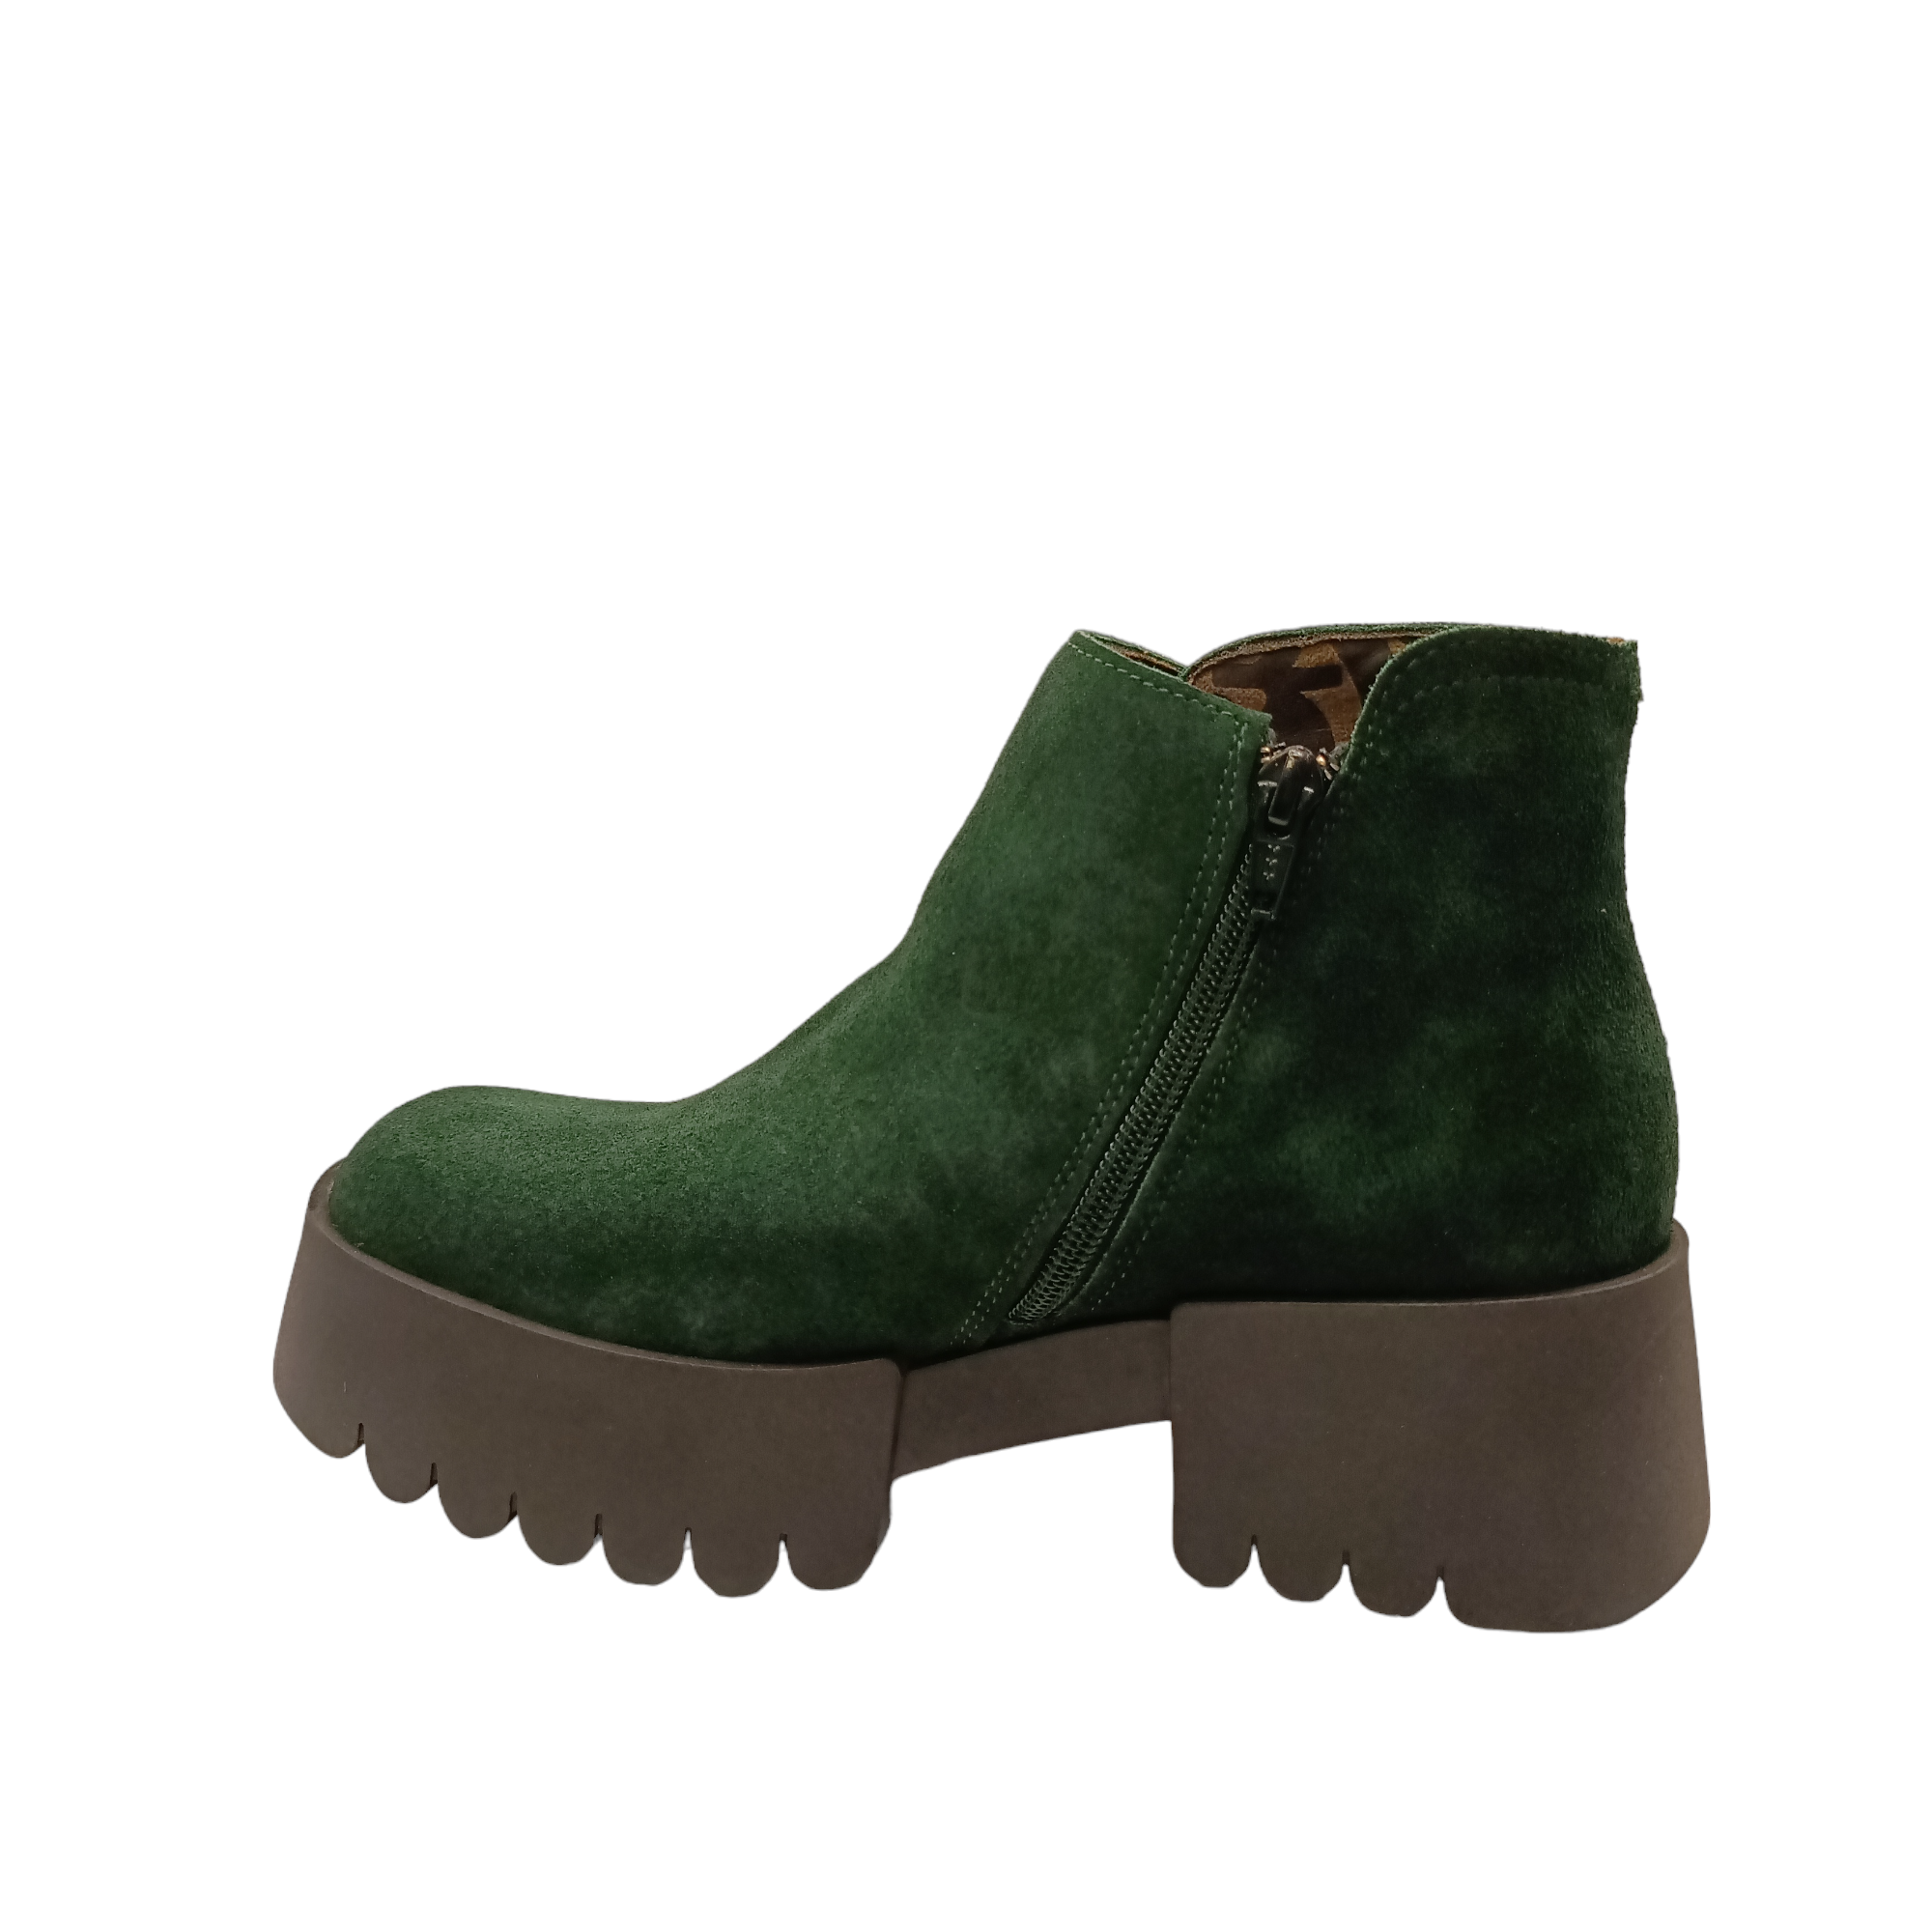 Shop Endo Fly London - with shoe&amp;me - from Fly London - Boots - Boot, Winter, Womens - [collection]